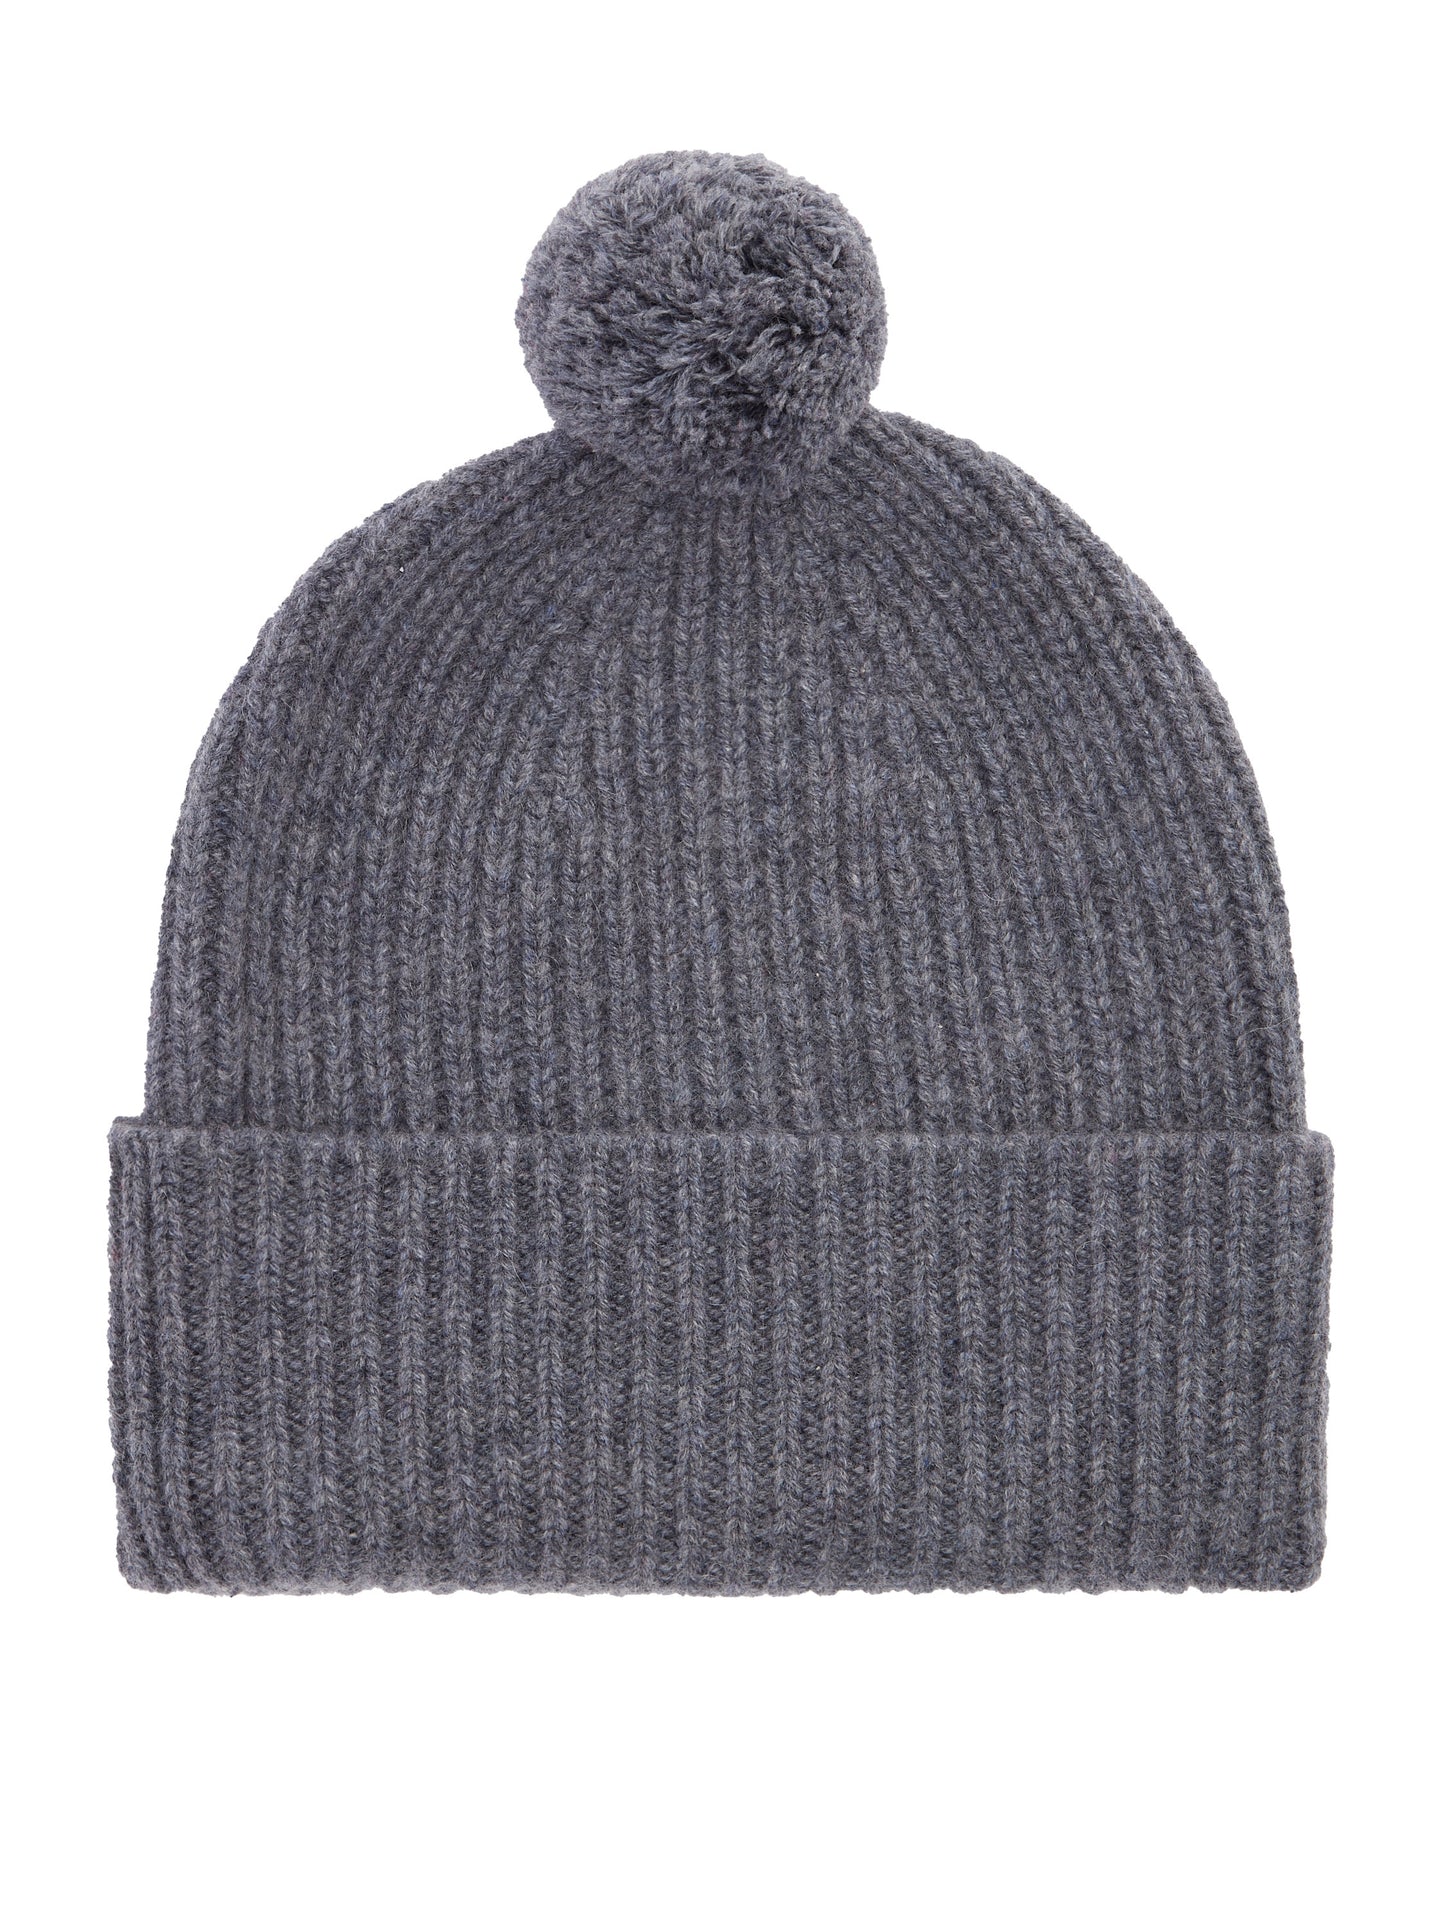 Knitted Pure Cashmere Hat- Charcoal